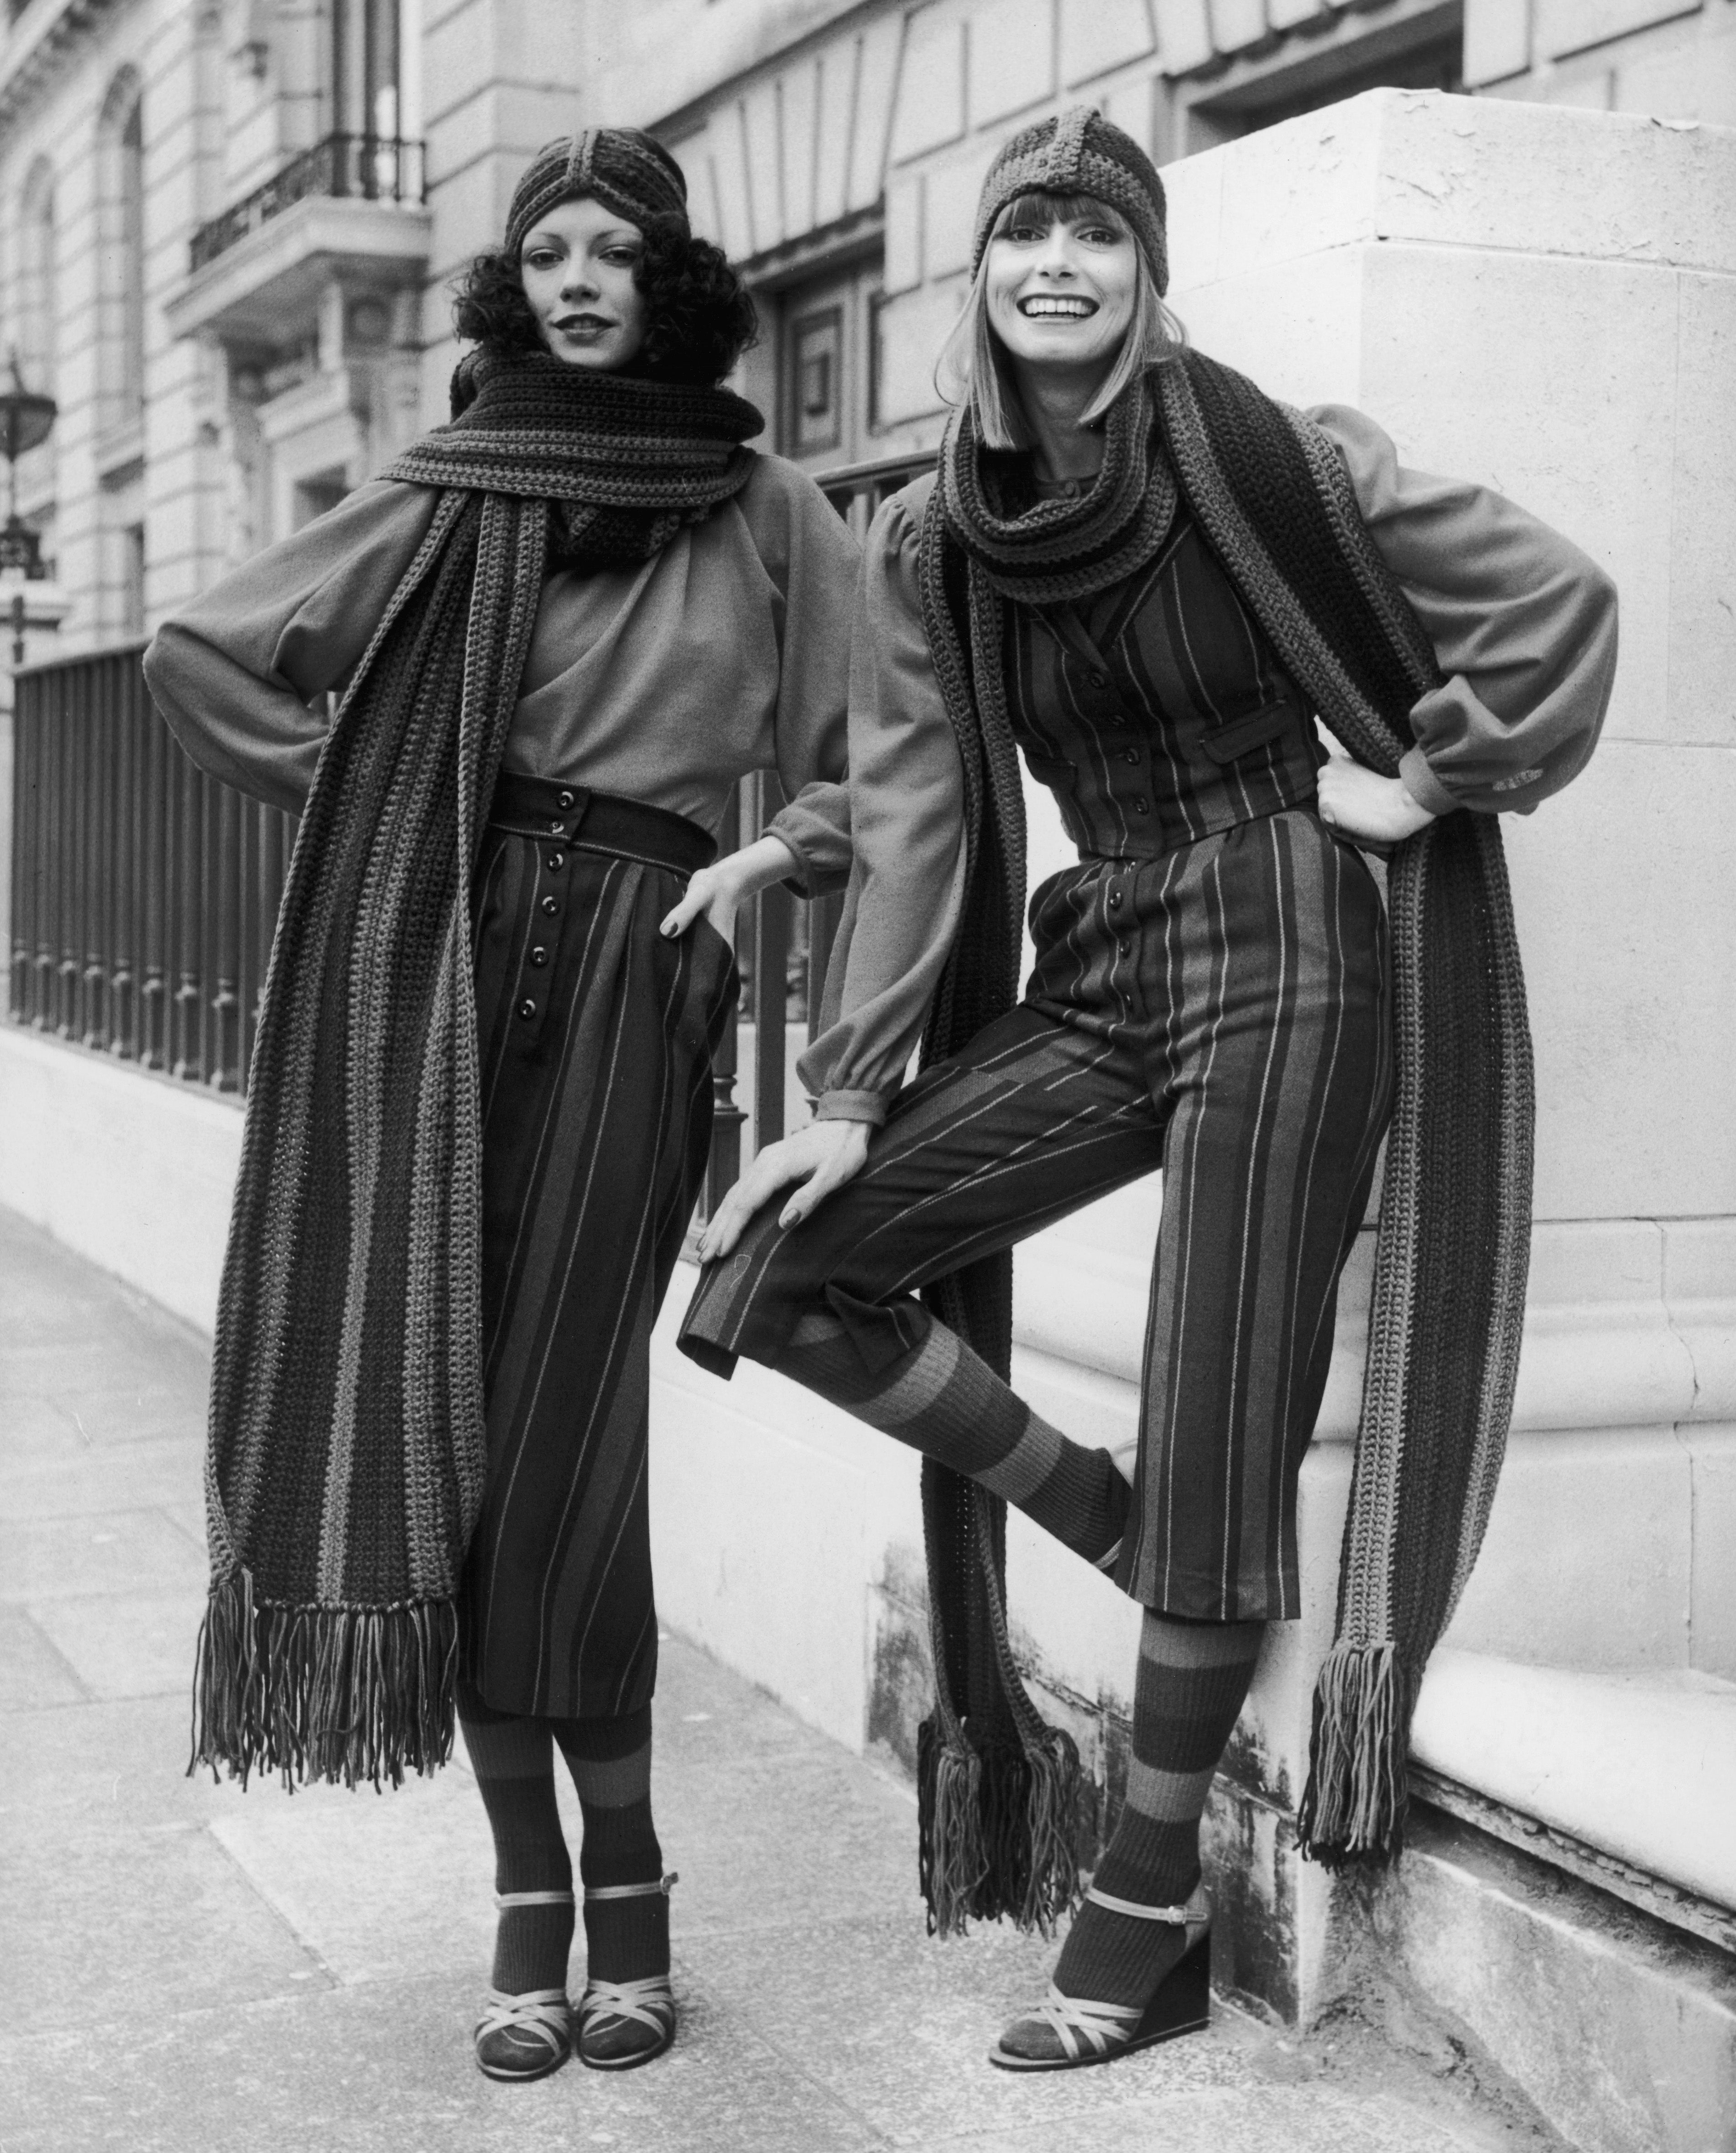 Outfits by Quant photographed in 1975